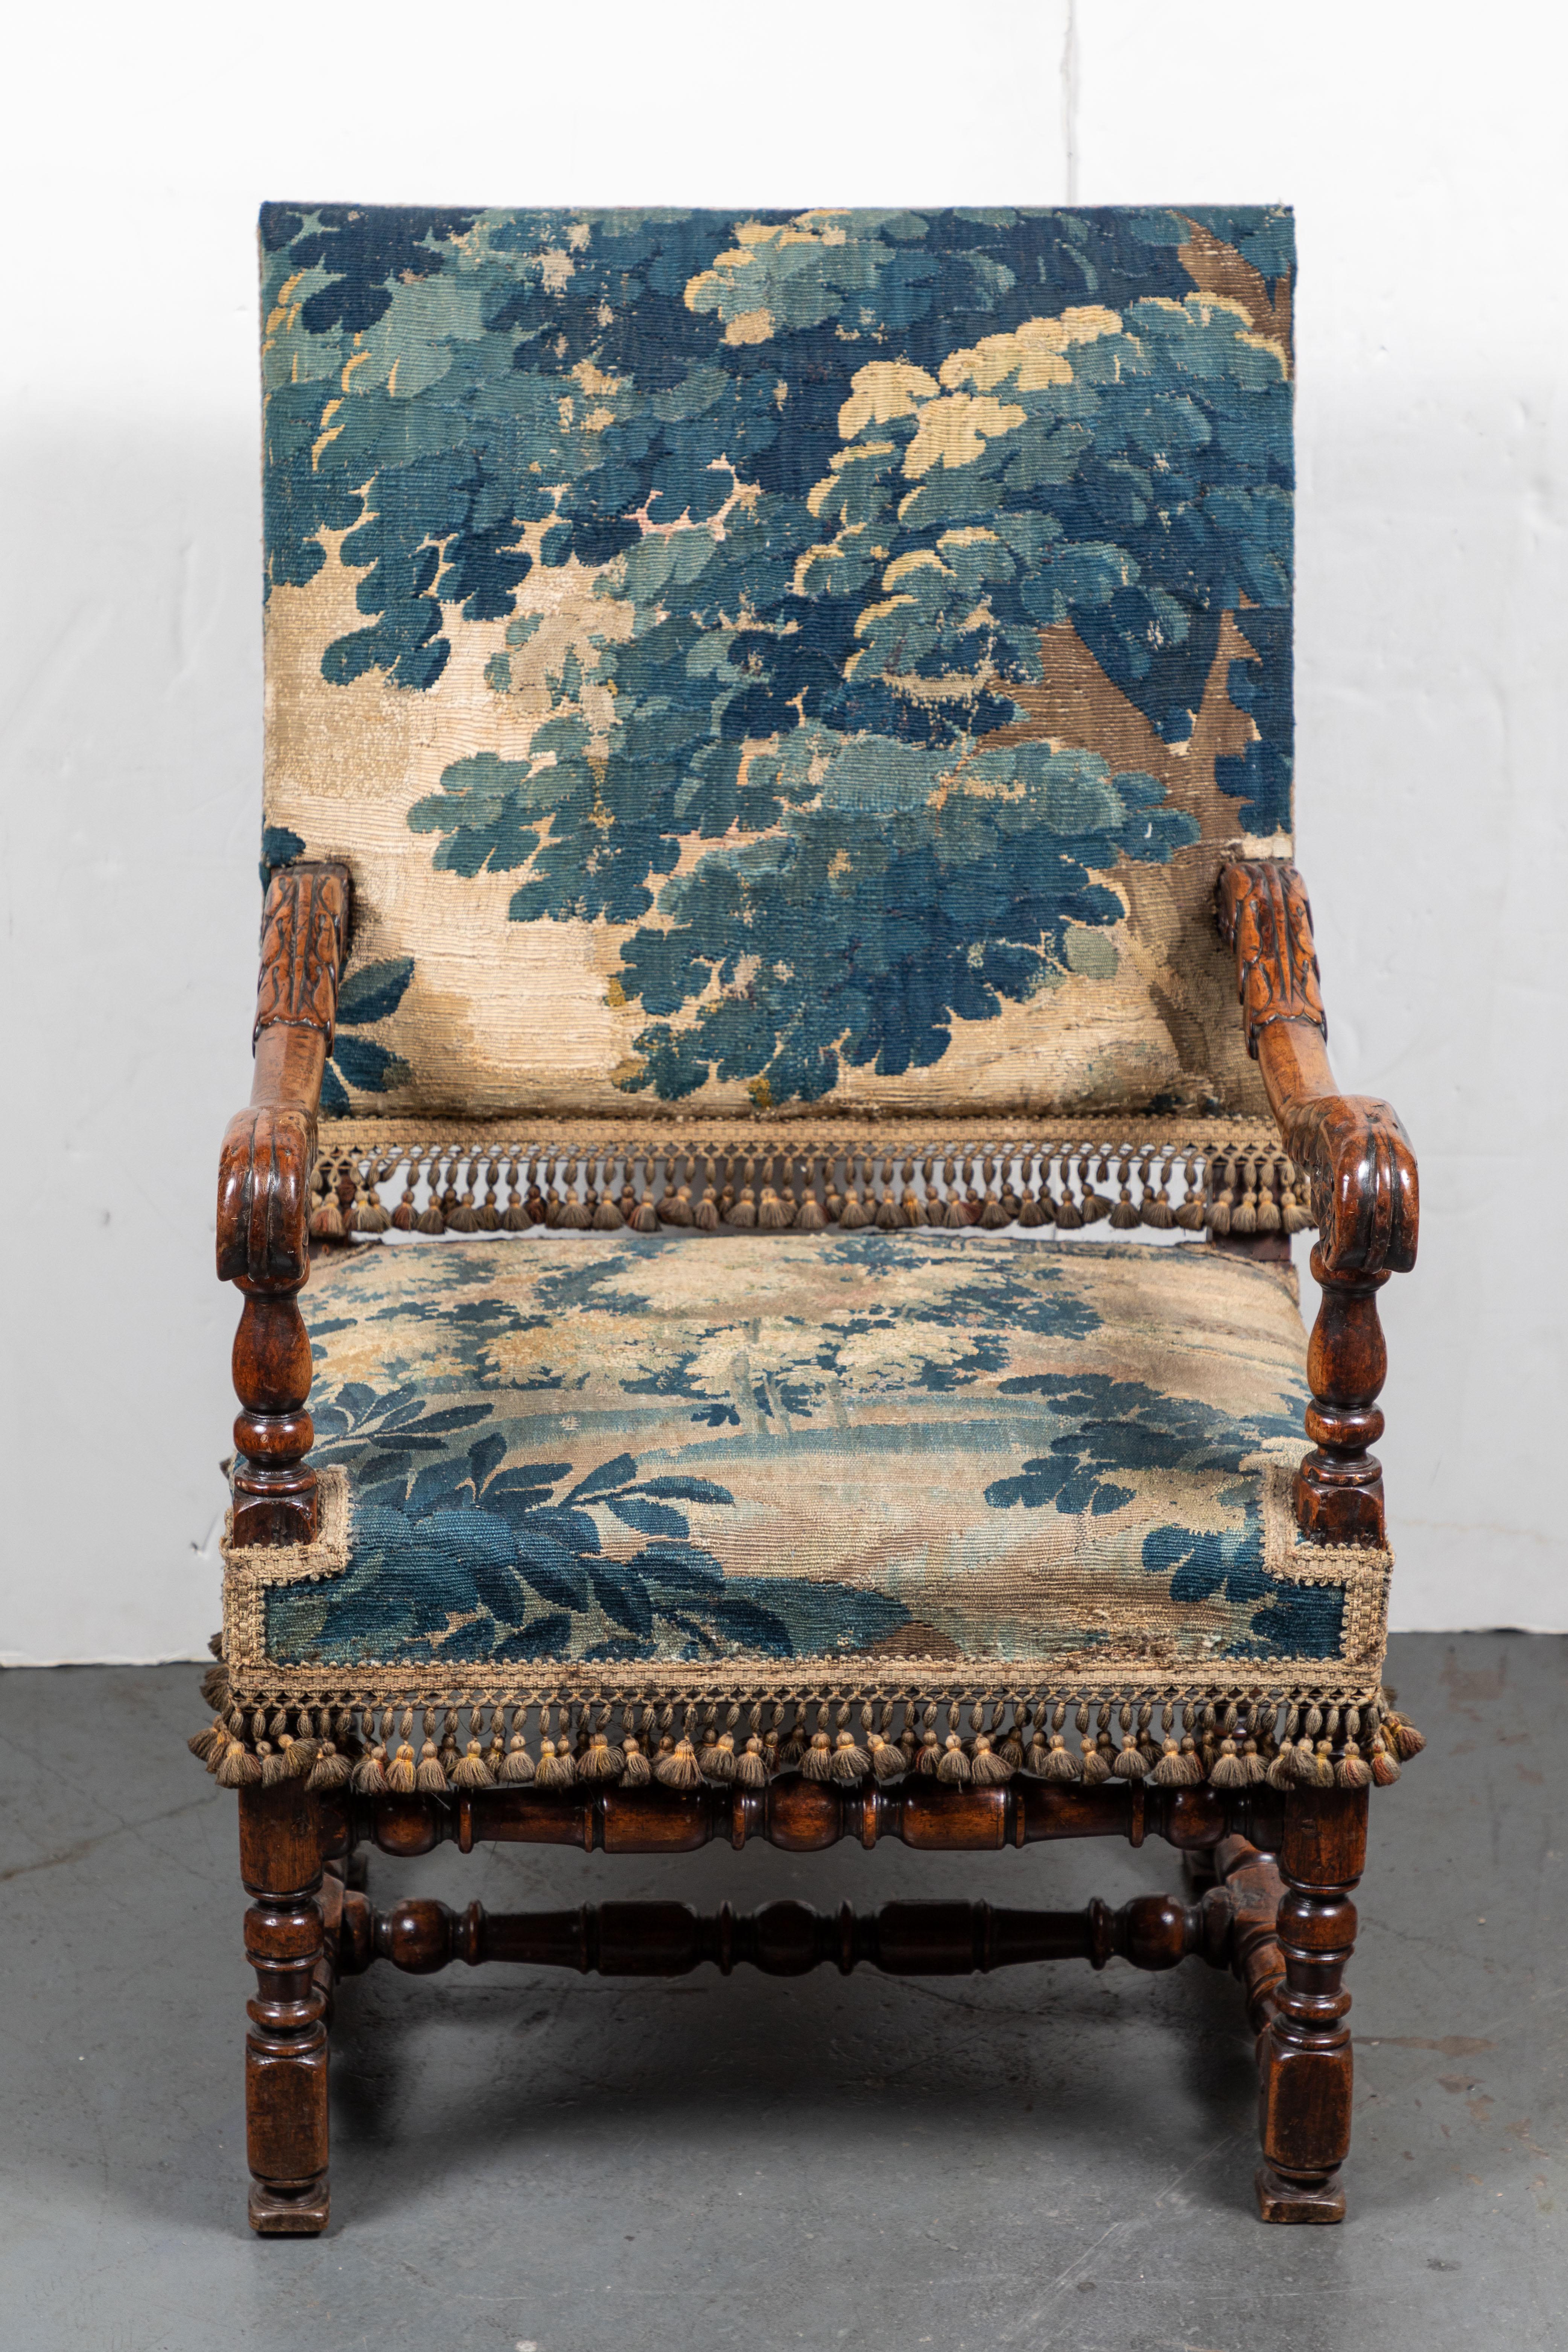 Absolutely lovely, French, 19th century, hand carved chair with scrolling arms terminating whirled, foliate hand-rests. The framed covered in an 18th century. Dutch tapestry, and embellished with period tassels.